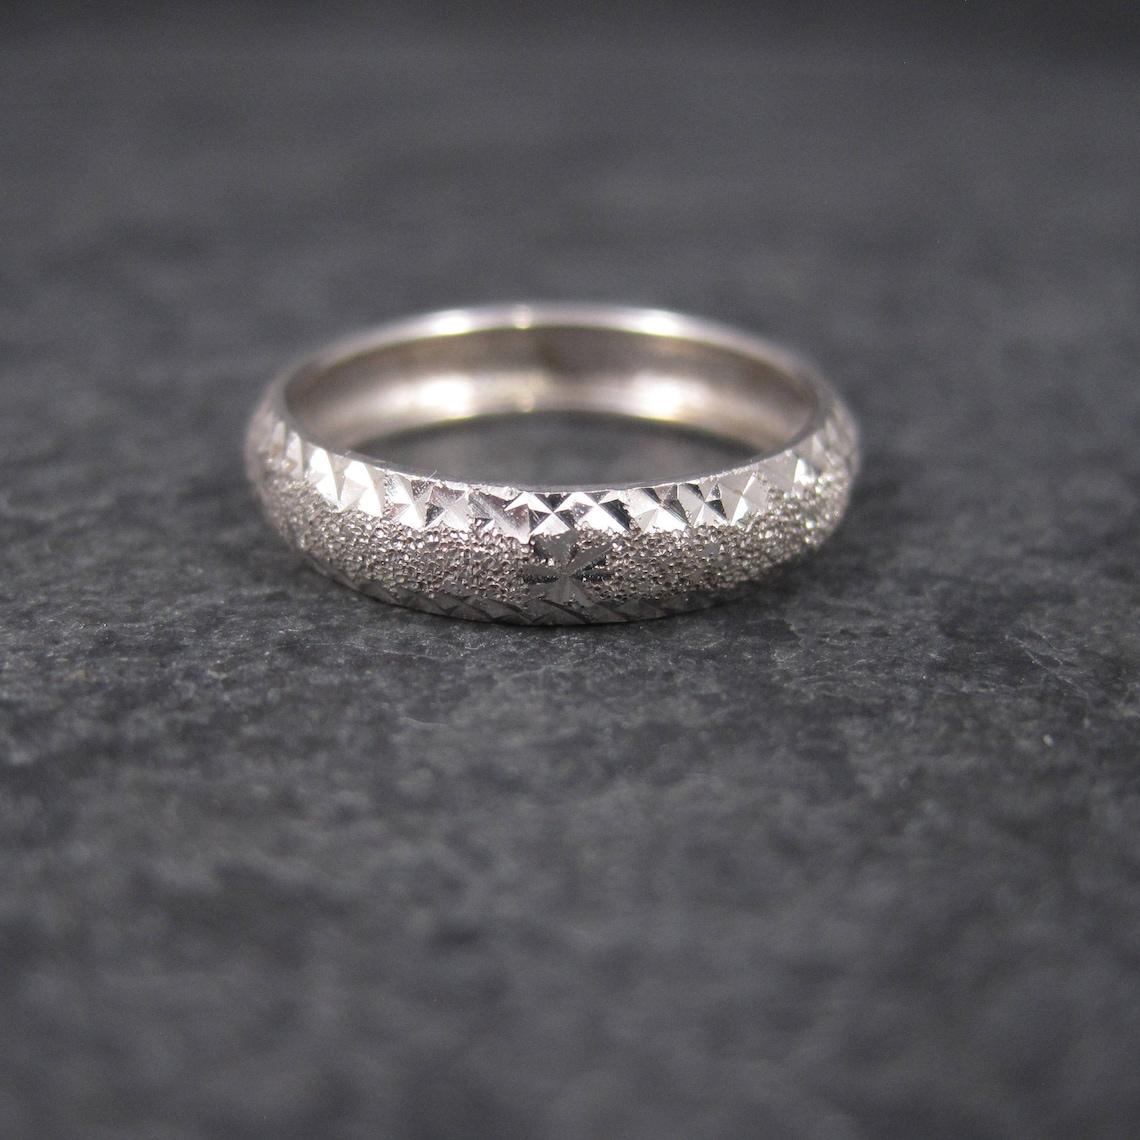 This beautiful band ring is 14k white gold.
It features a diamond cut starburst design.

Measurements: 4mm wide
Size: 5

Marks: 14K, SLC

Condition: Excellent